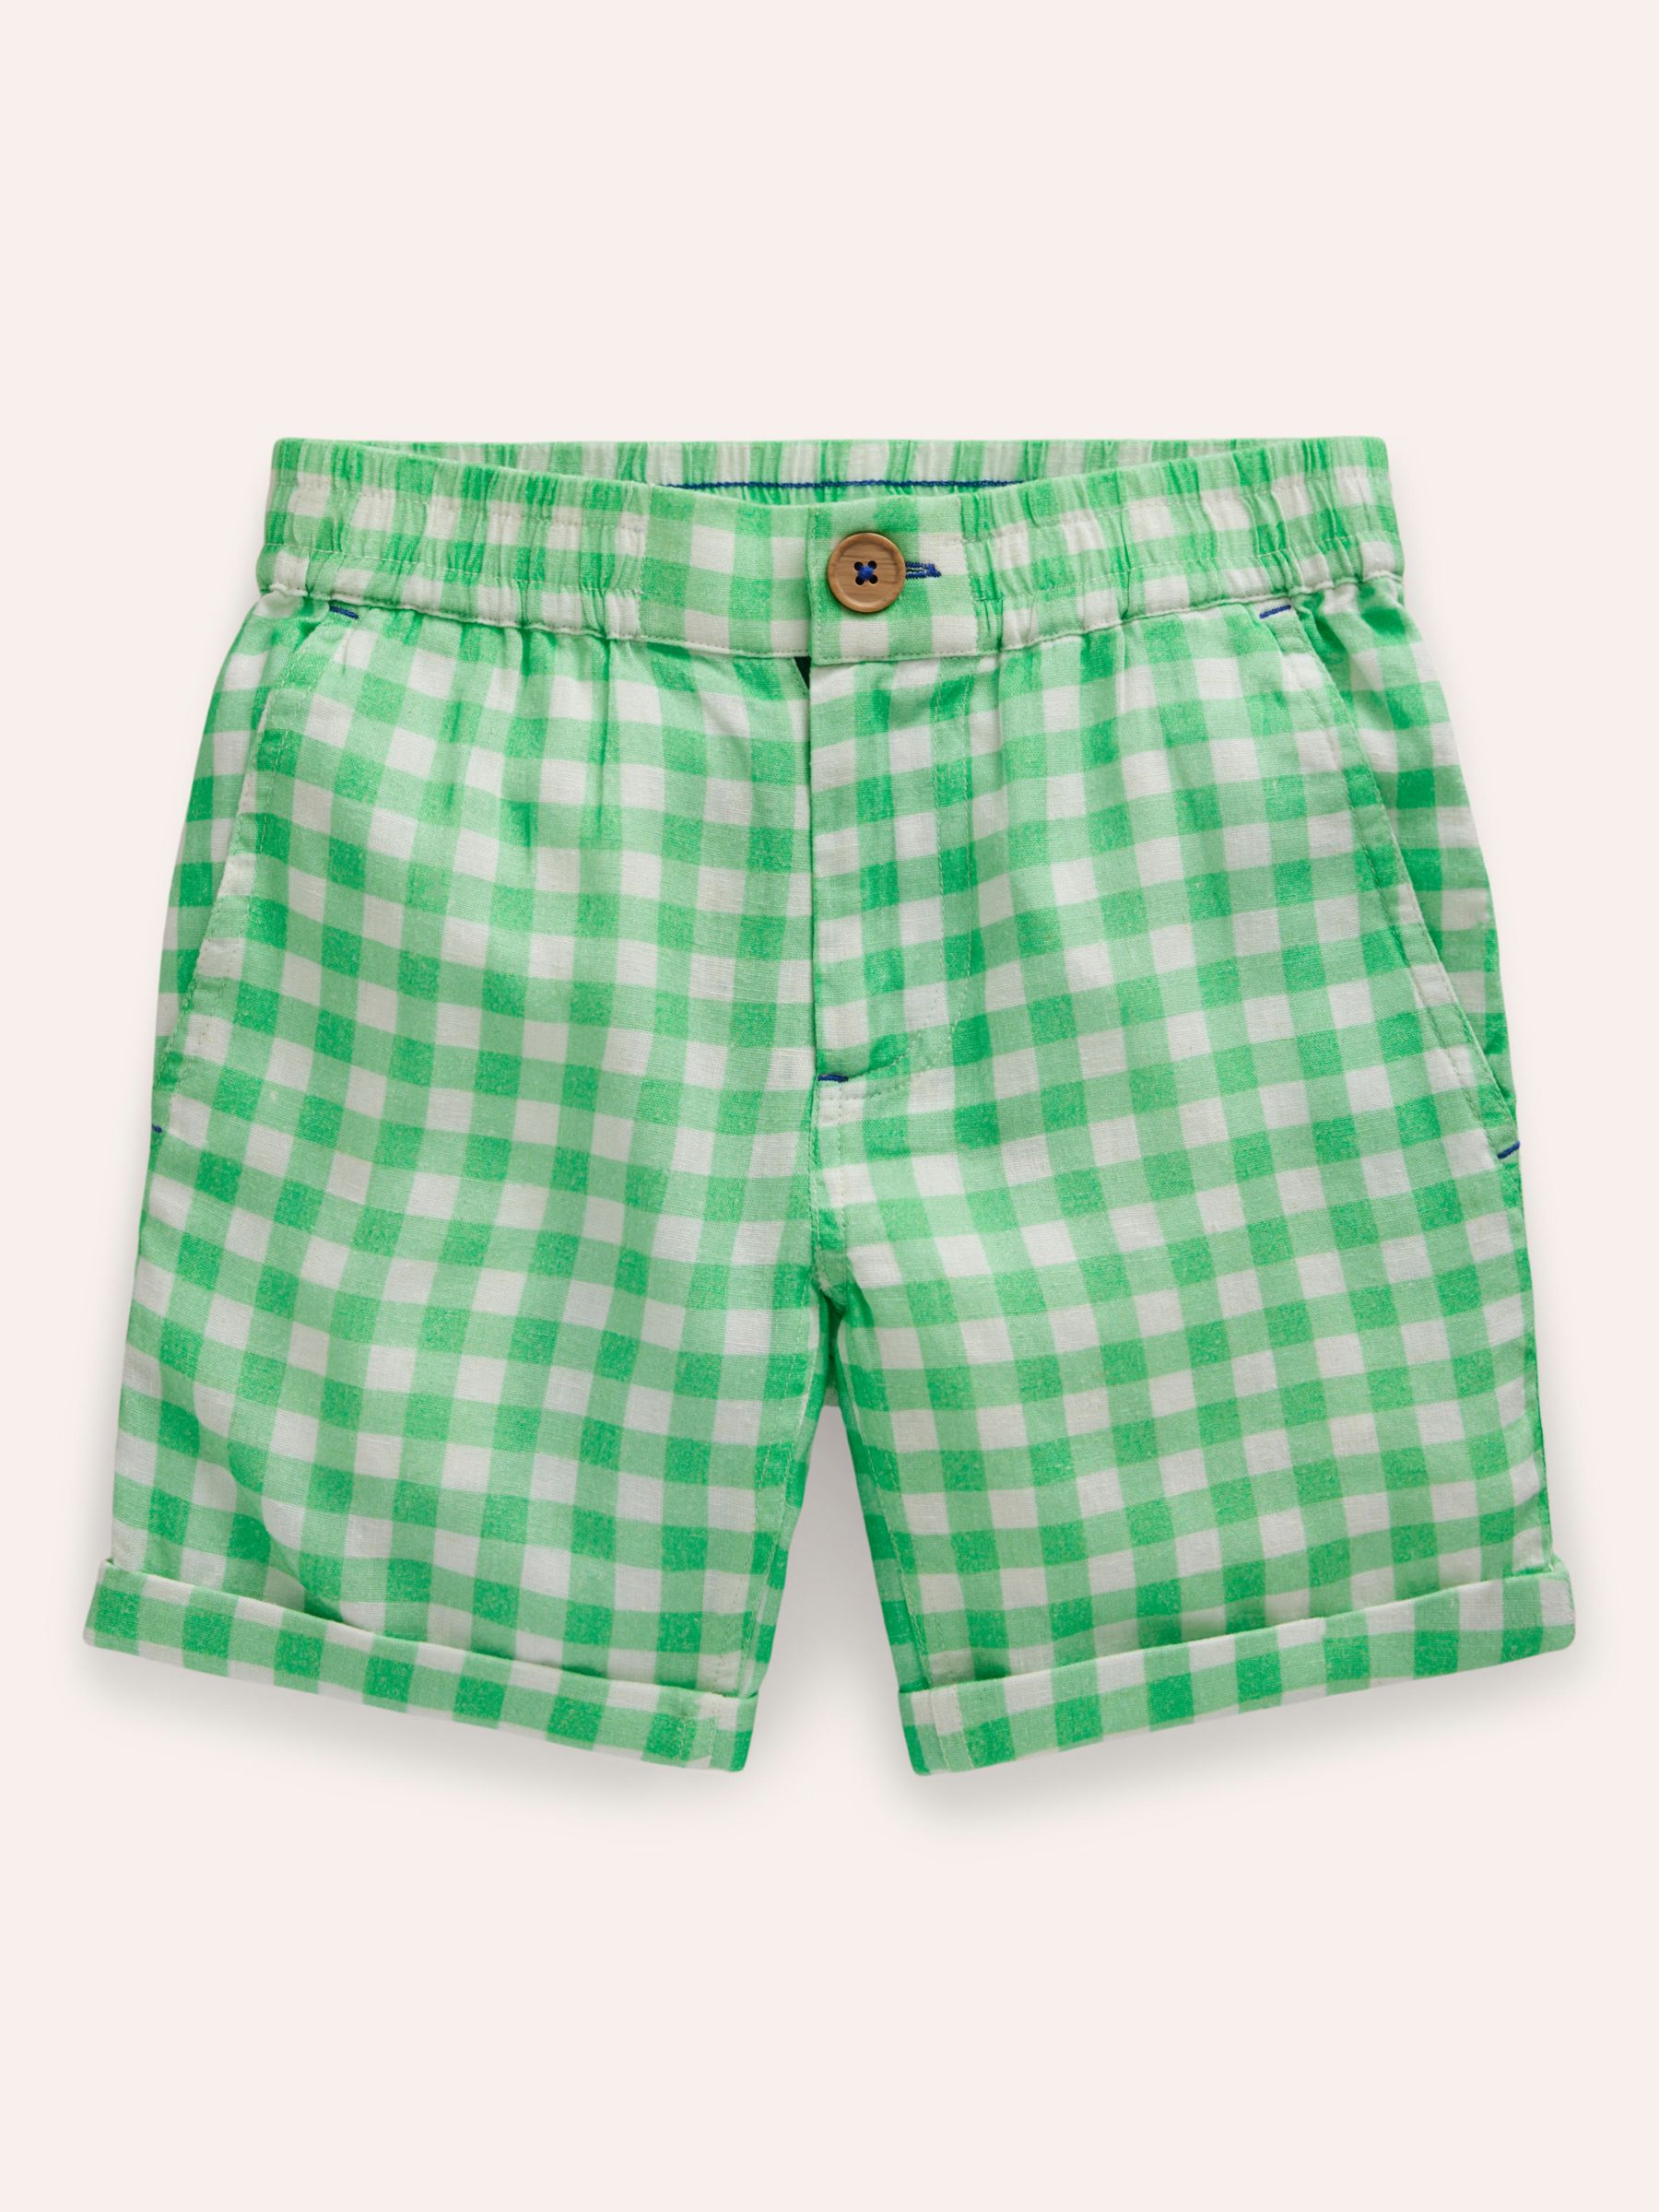 Mini Boden Kids' Gingham Smart Roll Up Shorts, Pea Green, 12-18 months